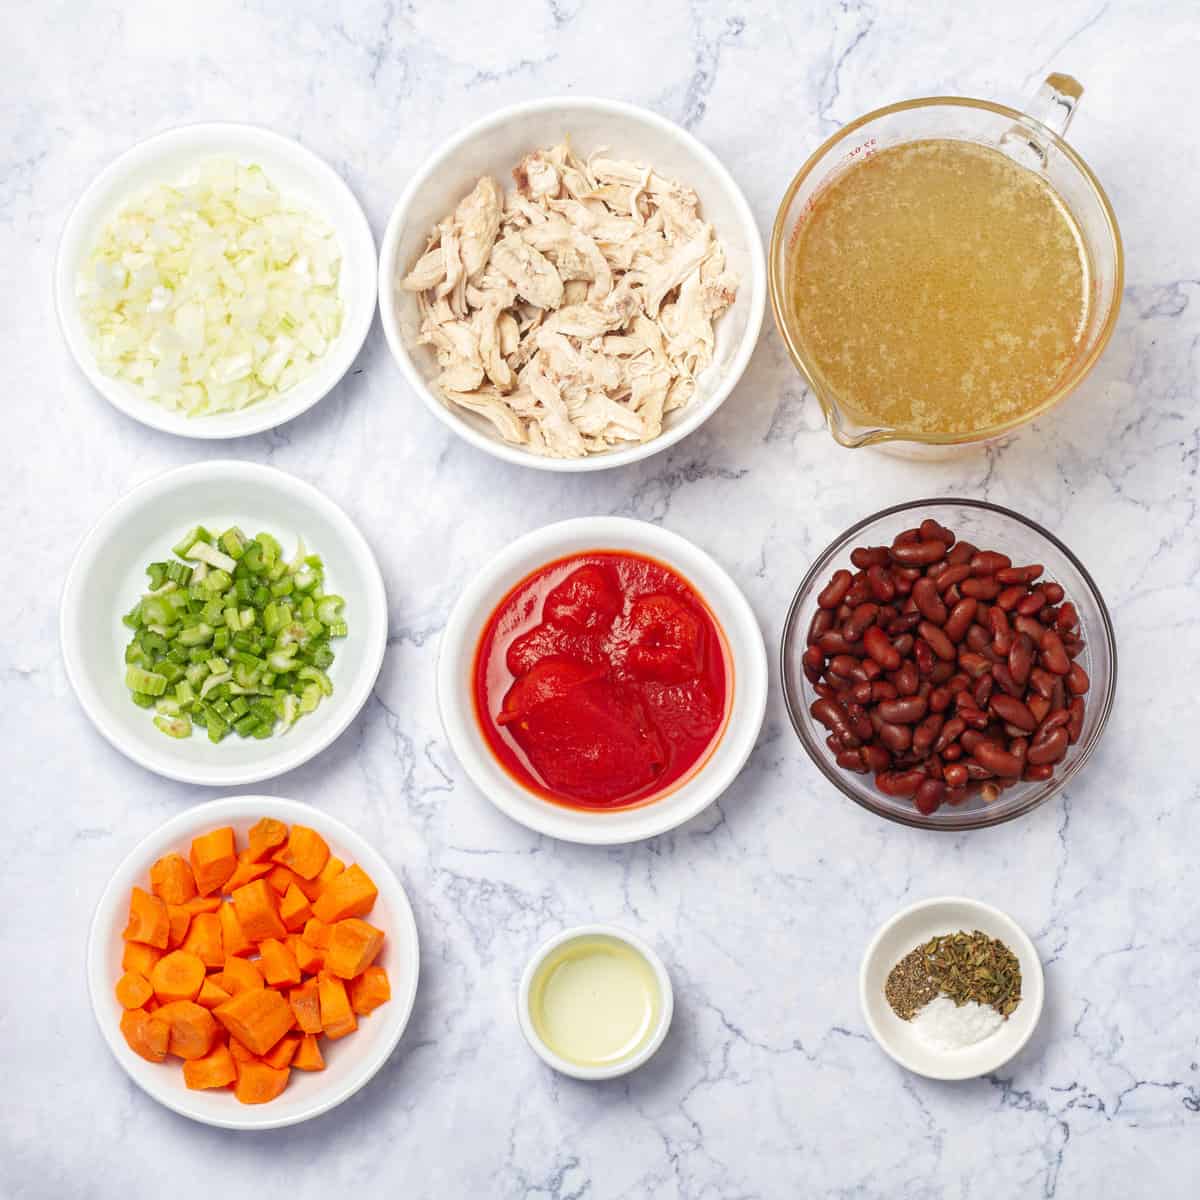 Ingredients of shredded chicken, kidney beans, onions, tomatoes, carrots, chicken broth, and spices in separate dishes. 